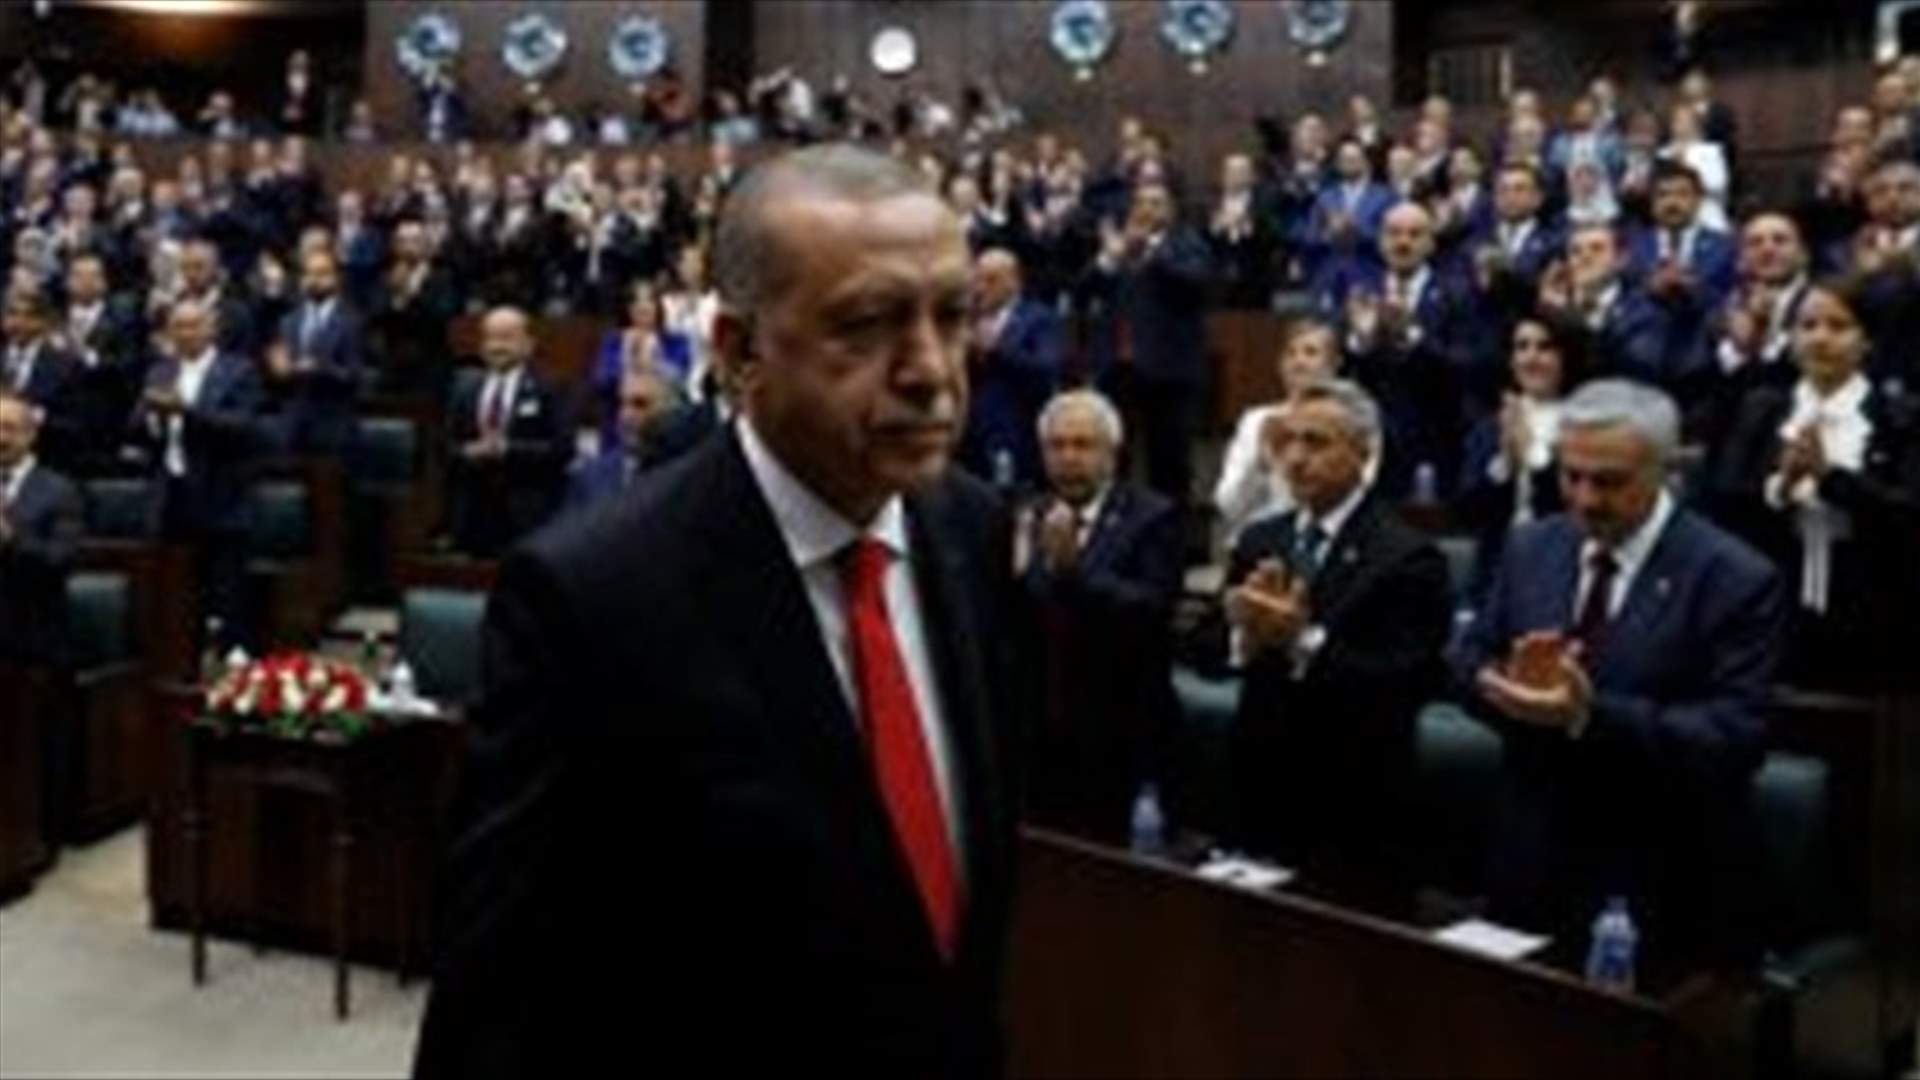 Turkey issues presidential decrees reshaping institutions